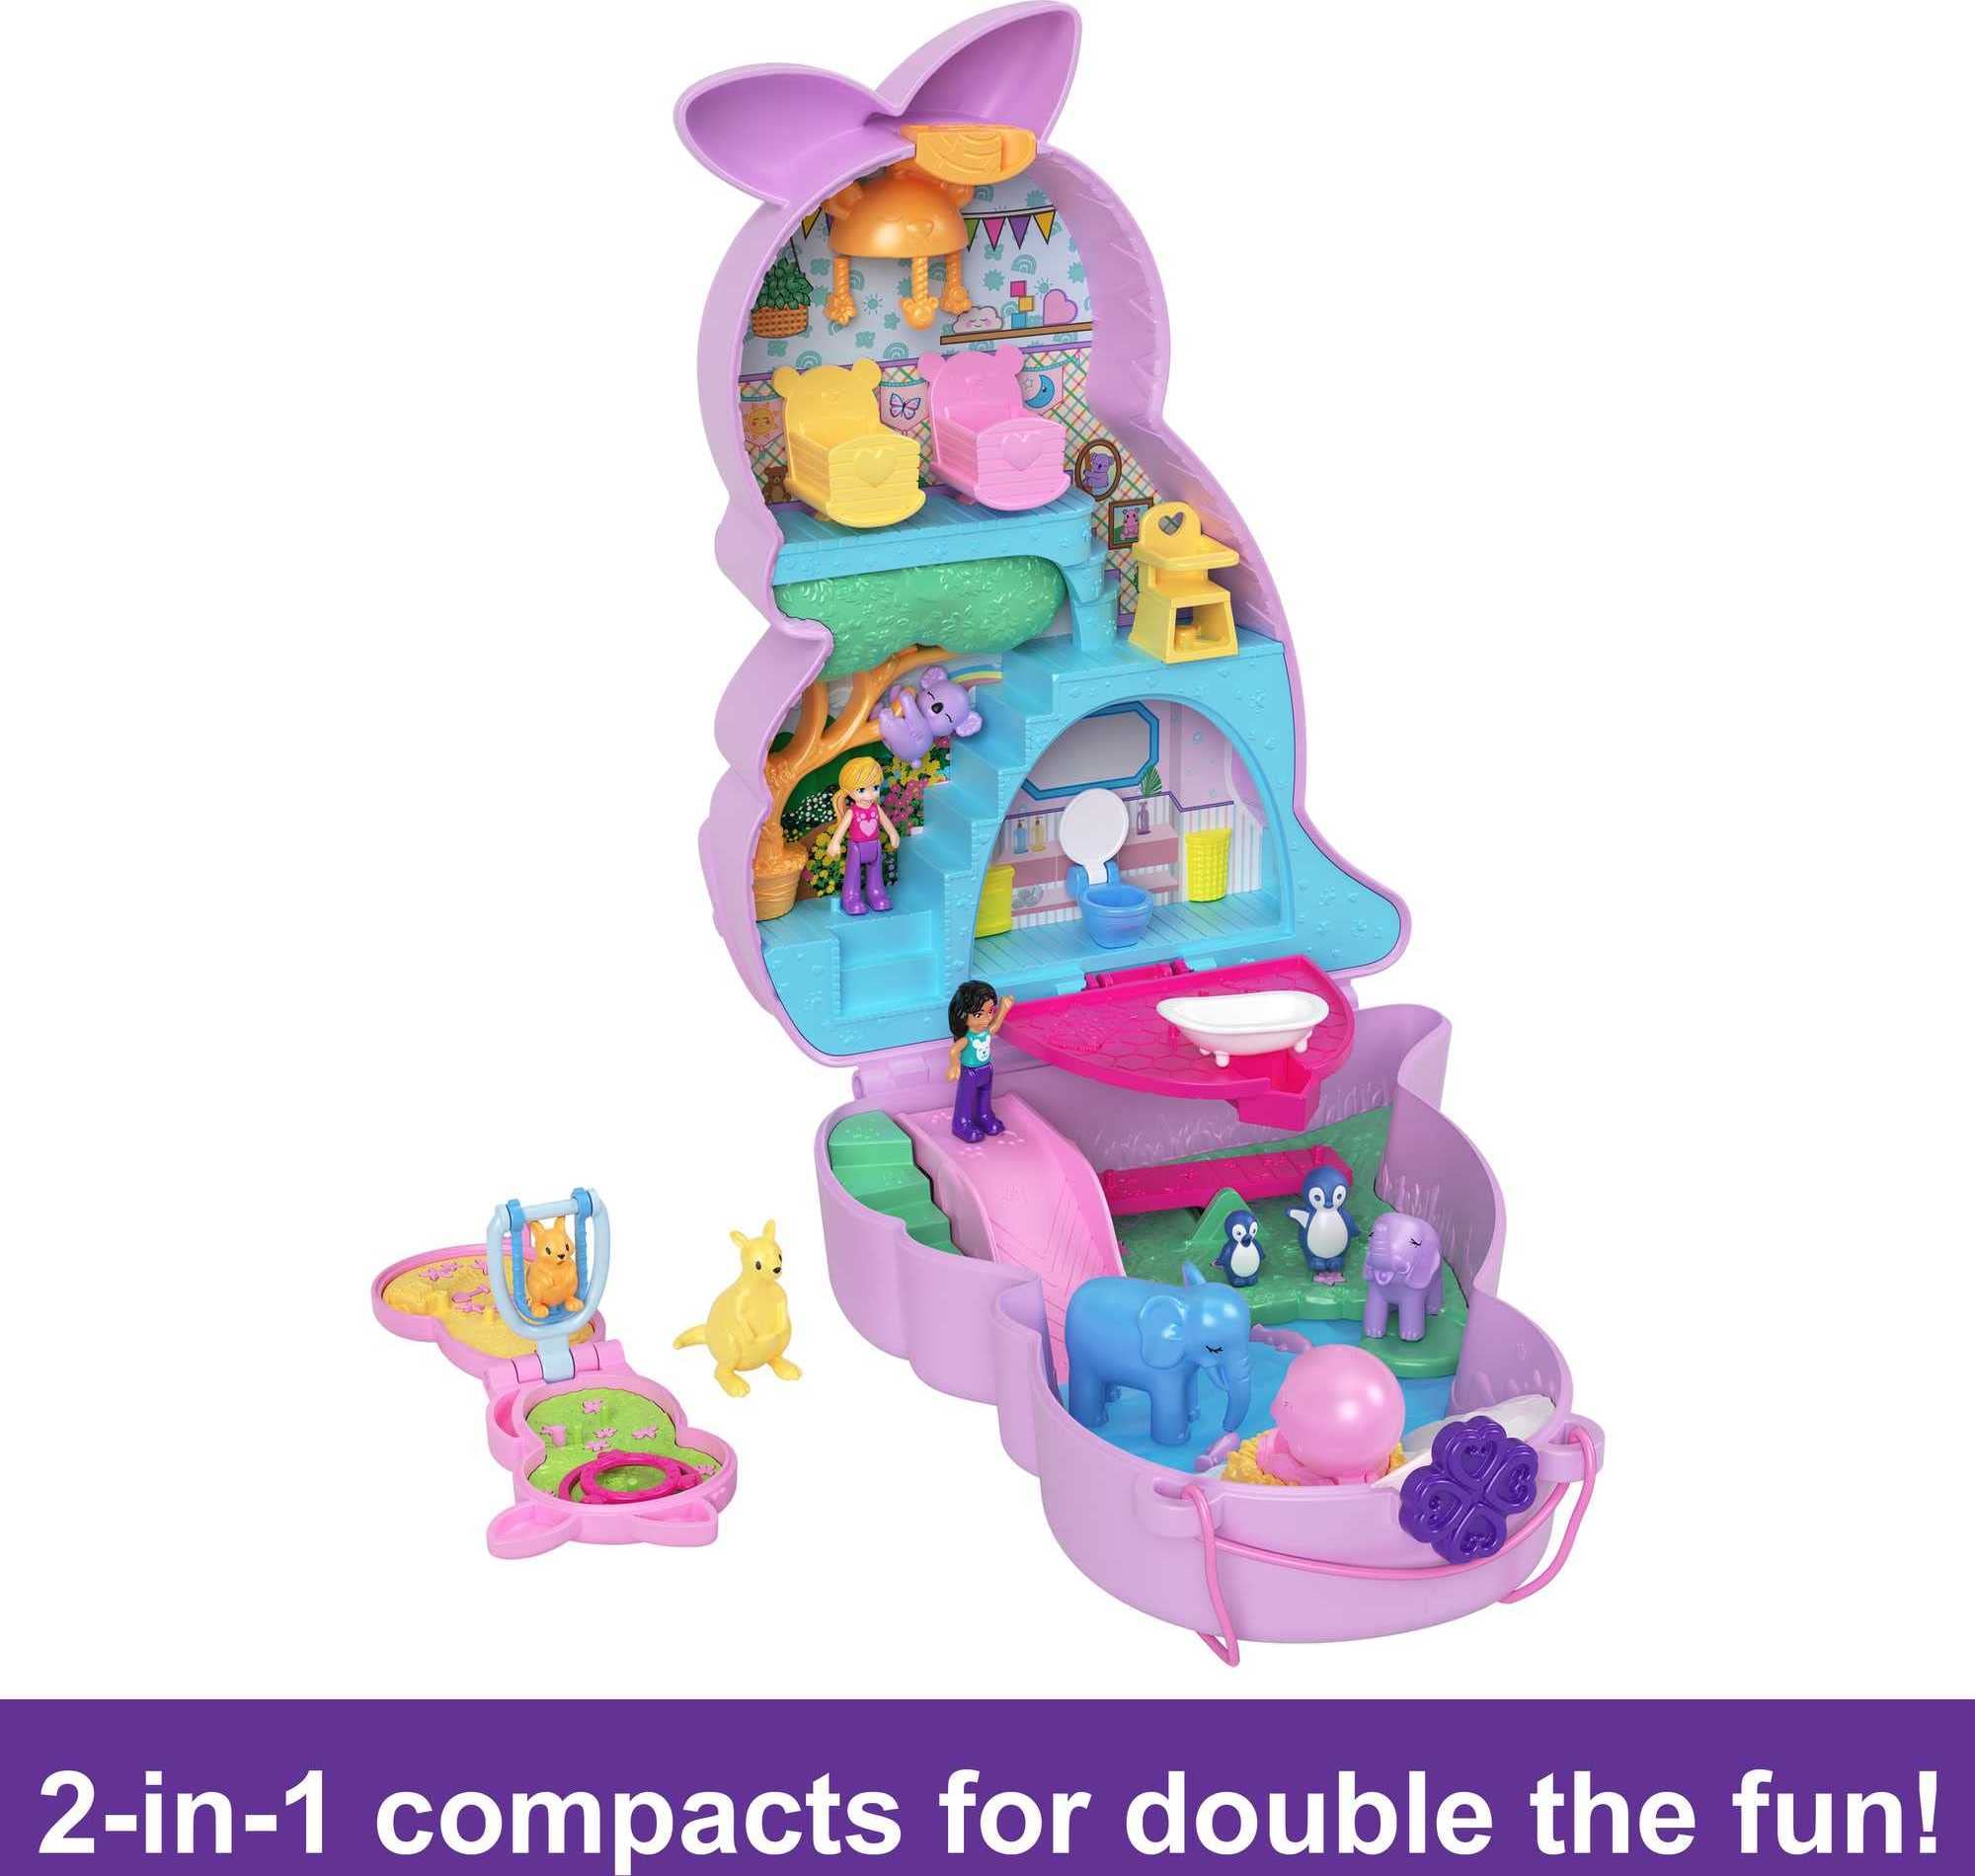 Polly Pocket 2-In-1 Travel Toy Playset, Animal Toy with 2 Dolls & Accessories, Mama & Joey Kangaroo Purse Large Compact